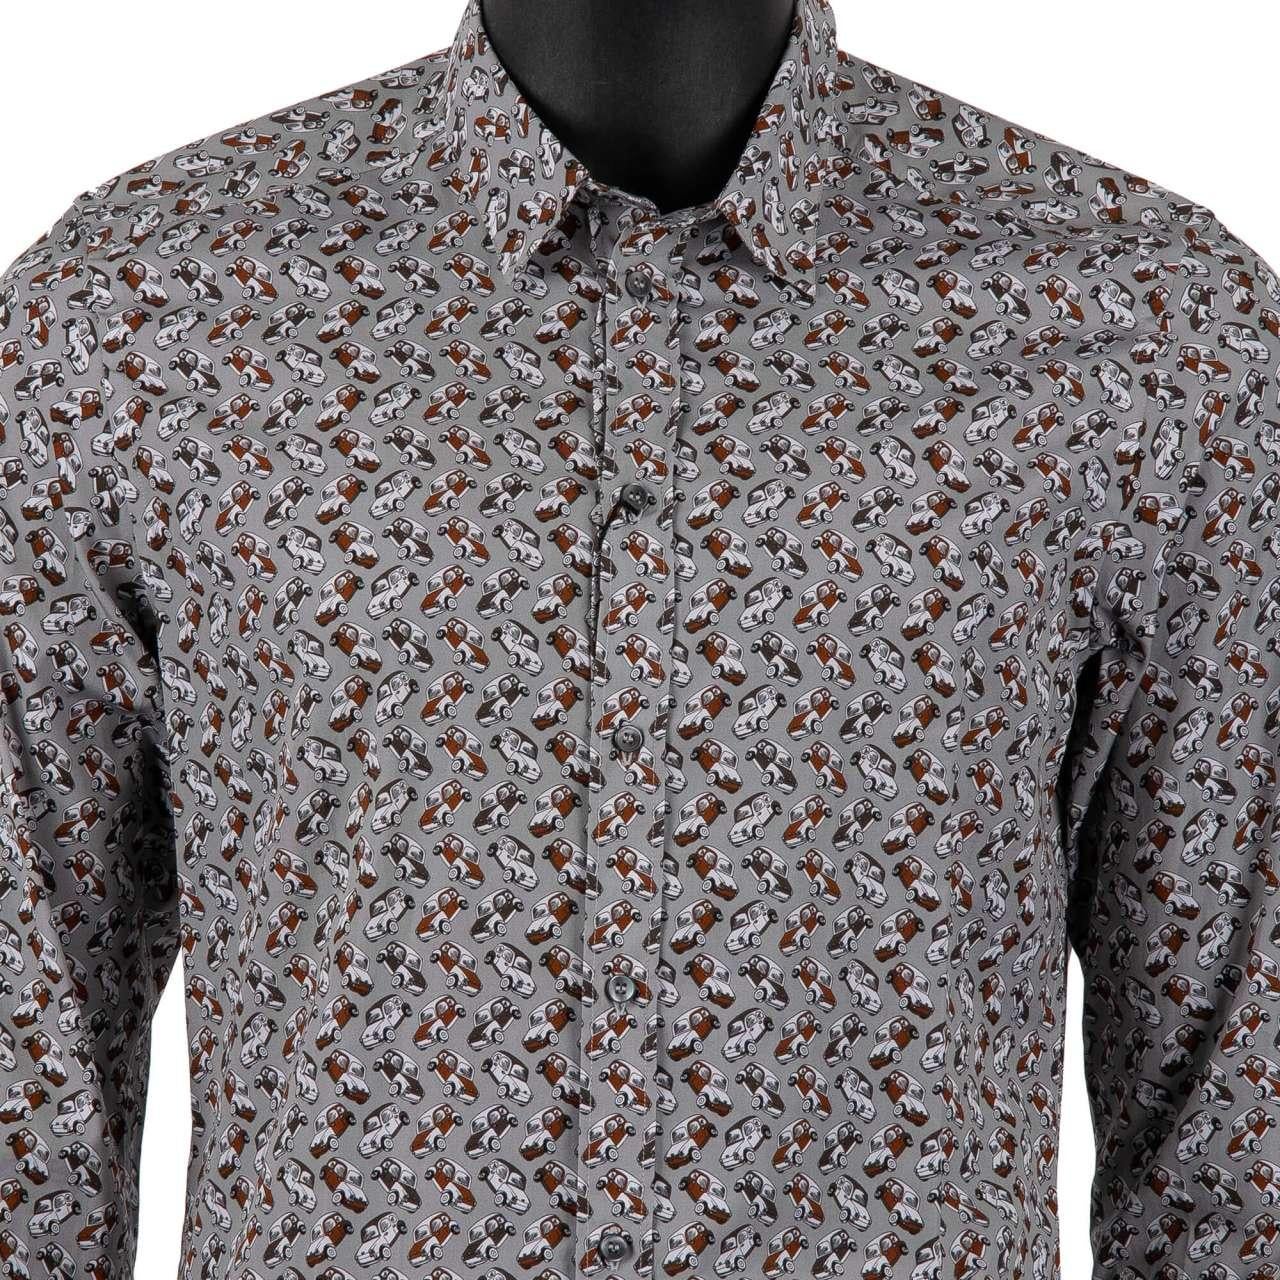 - Car printed cotton shirt with short collar by DOLCE & GABBANA - GOLD Line - RUNWAY - Dolce & Gabbana Fashion Show - New with tag - Former RRP: EUR 385 - MADE in ITALY - Slim F- Model: G5CH0T-FS5OE-X0800 - Material: 100% Cotton - Color: Gray -